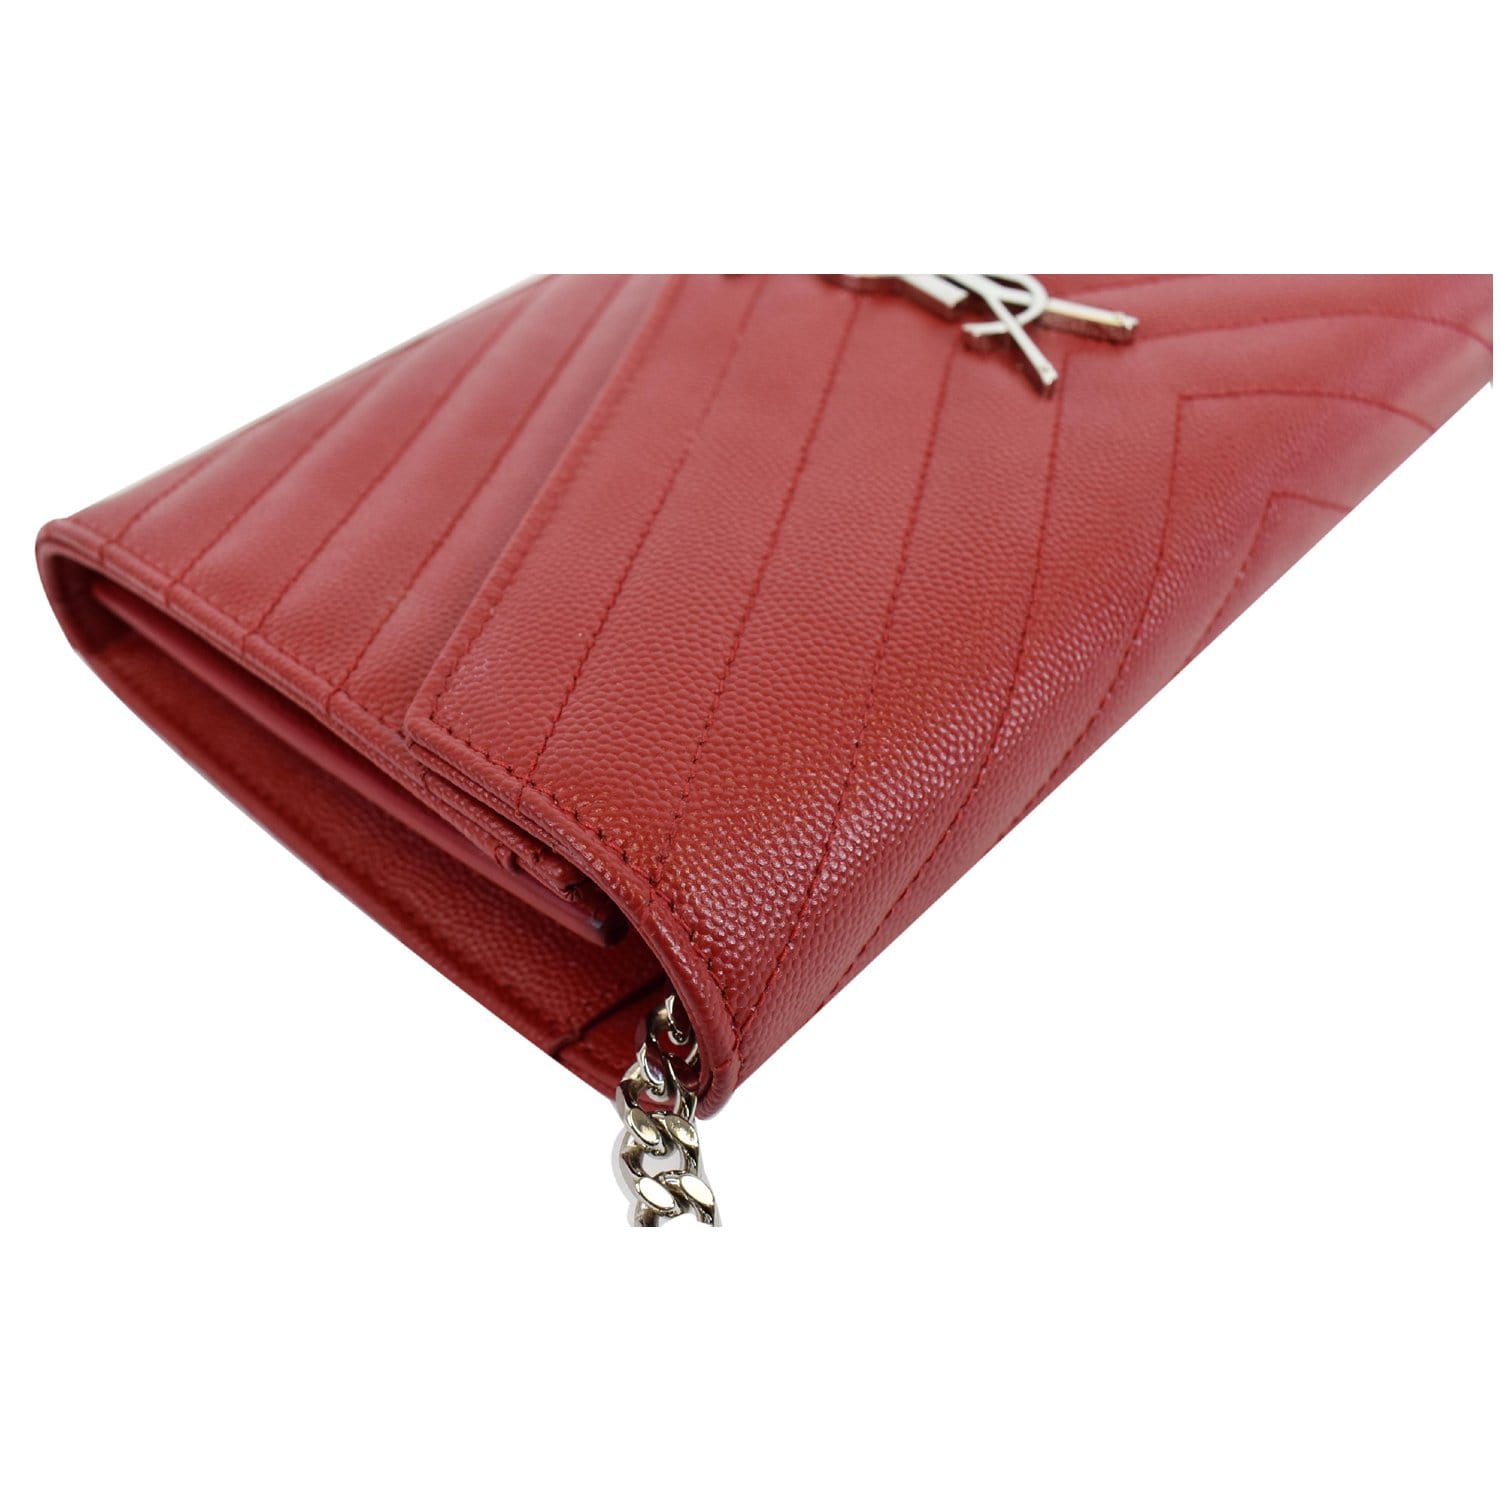 Chyc leather card wallet Saint Laurent Red in Leather - 24187865